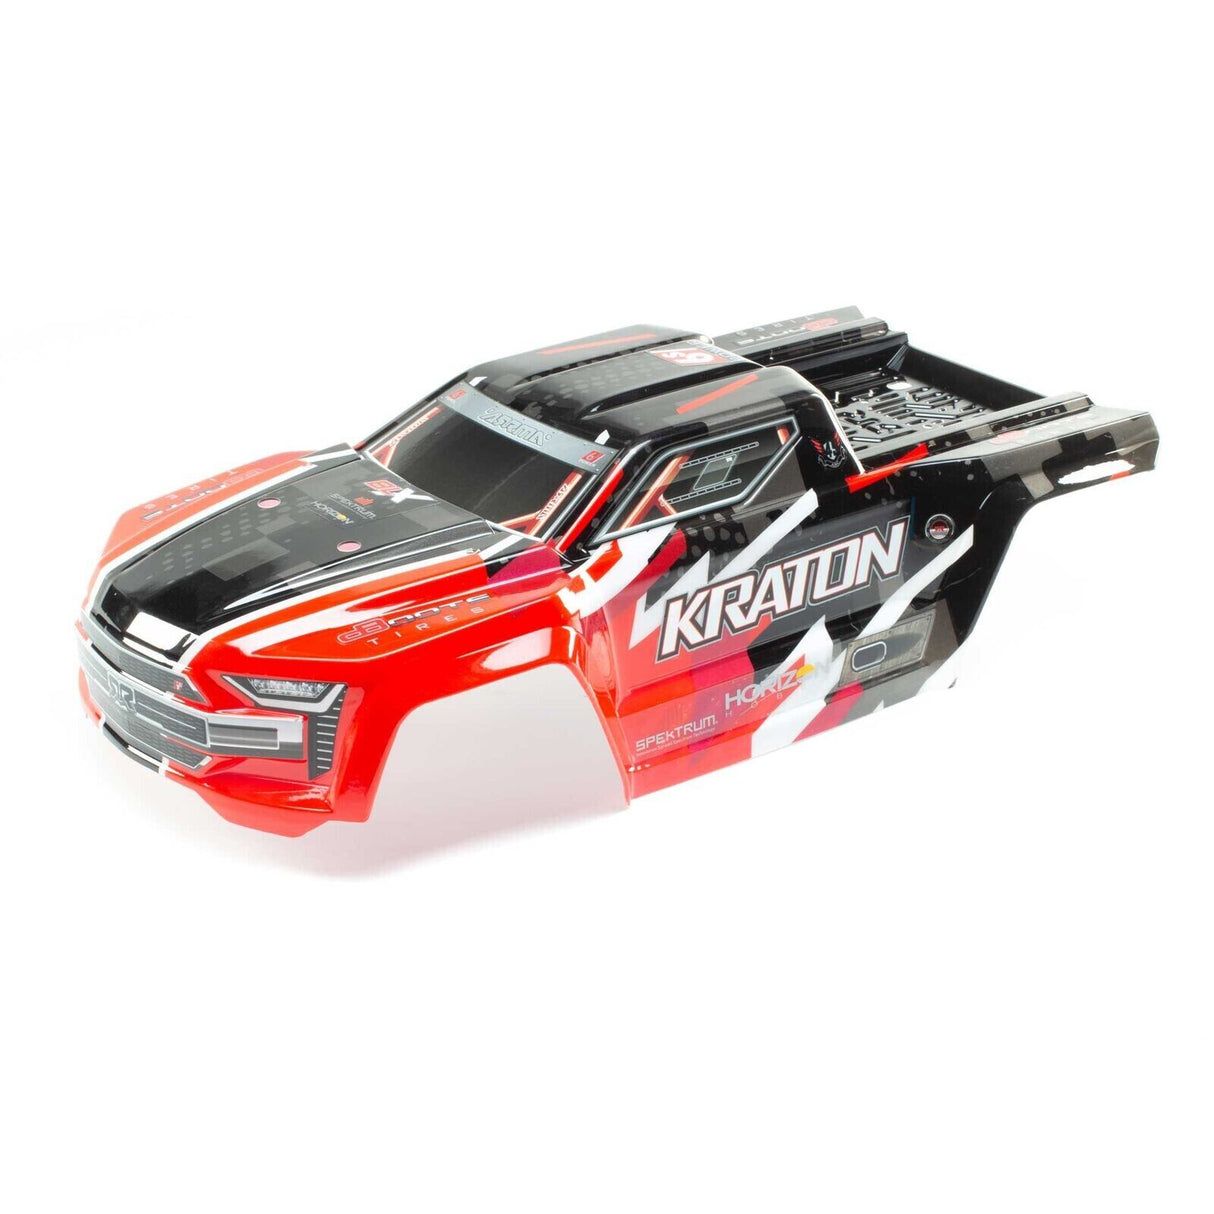 Arrma Kraton 6S BLX Painted Decaled Trimmed Body (Red), AR406156